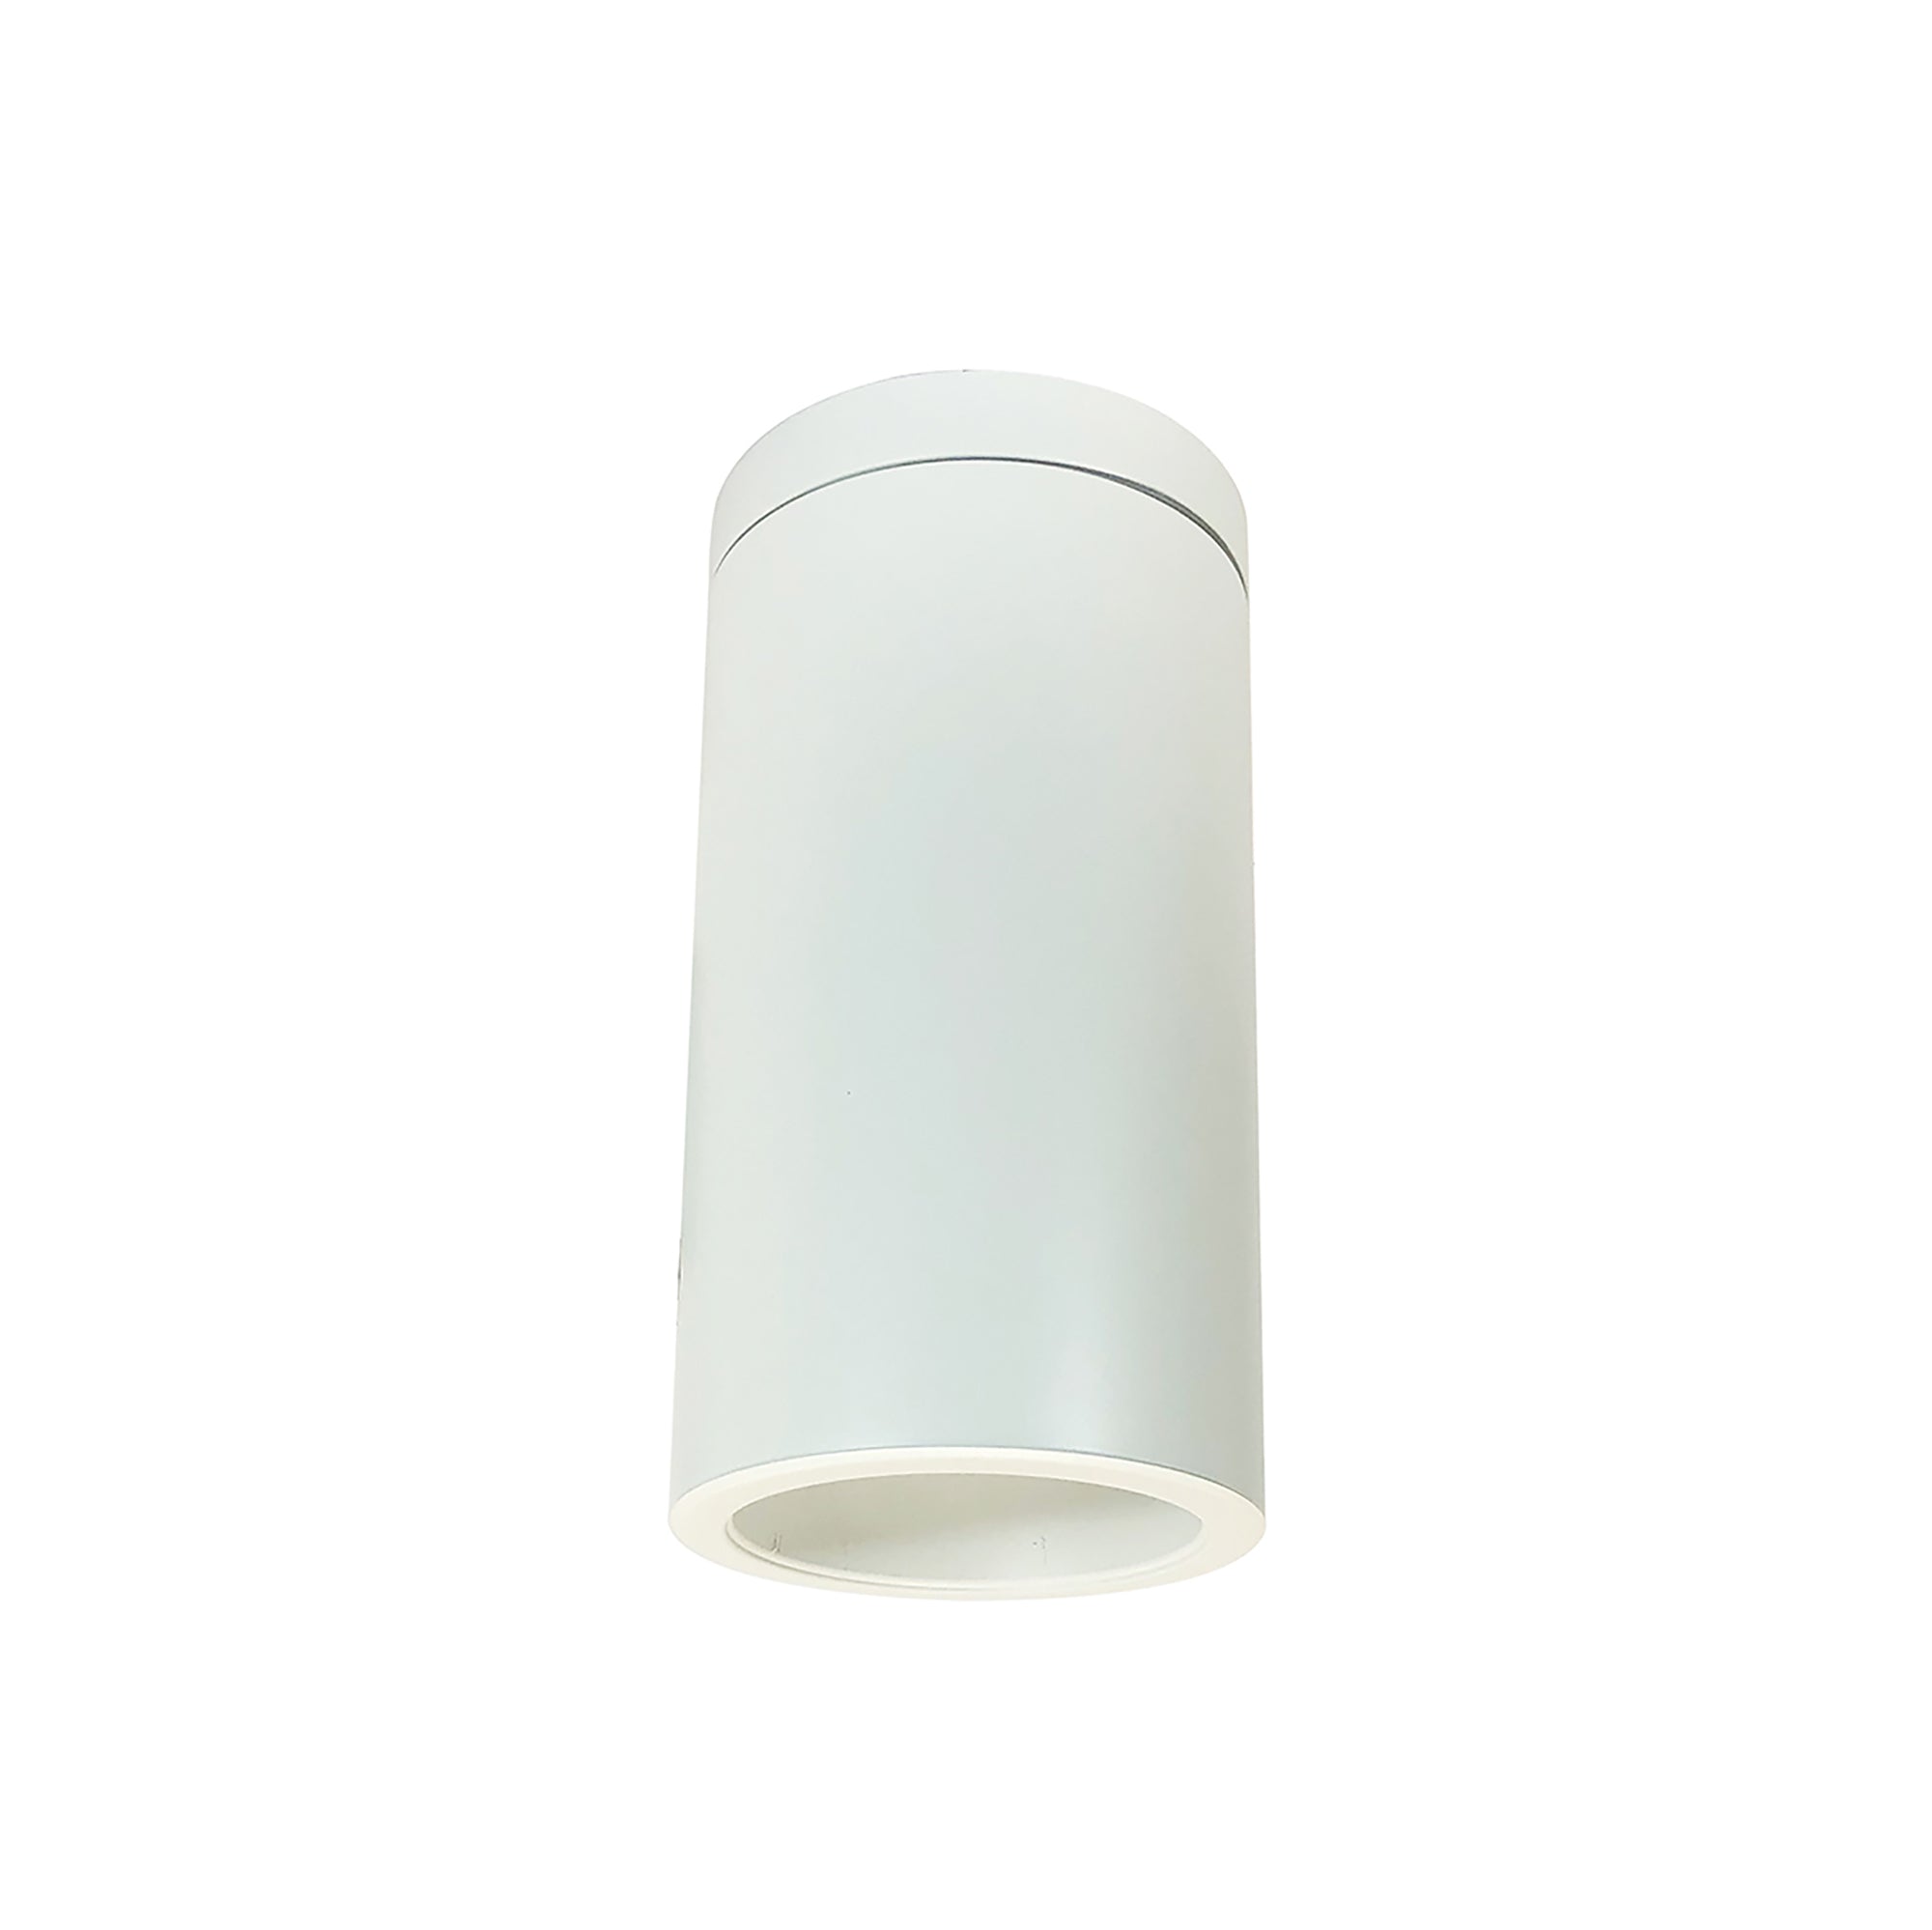 Nora Lighting NYLS2-6S15135FWWW6 - Cylinder - 6 Inch CYL SURFACE 1500LM REF FLD 35K WHT/WHT WHT CYL 120-277 0-10V